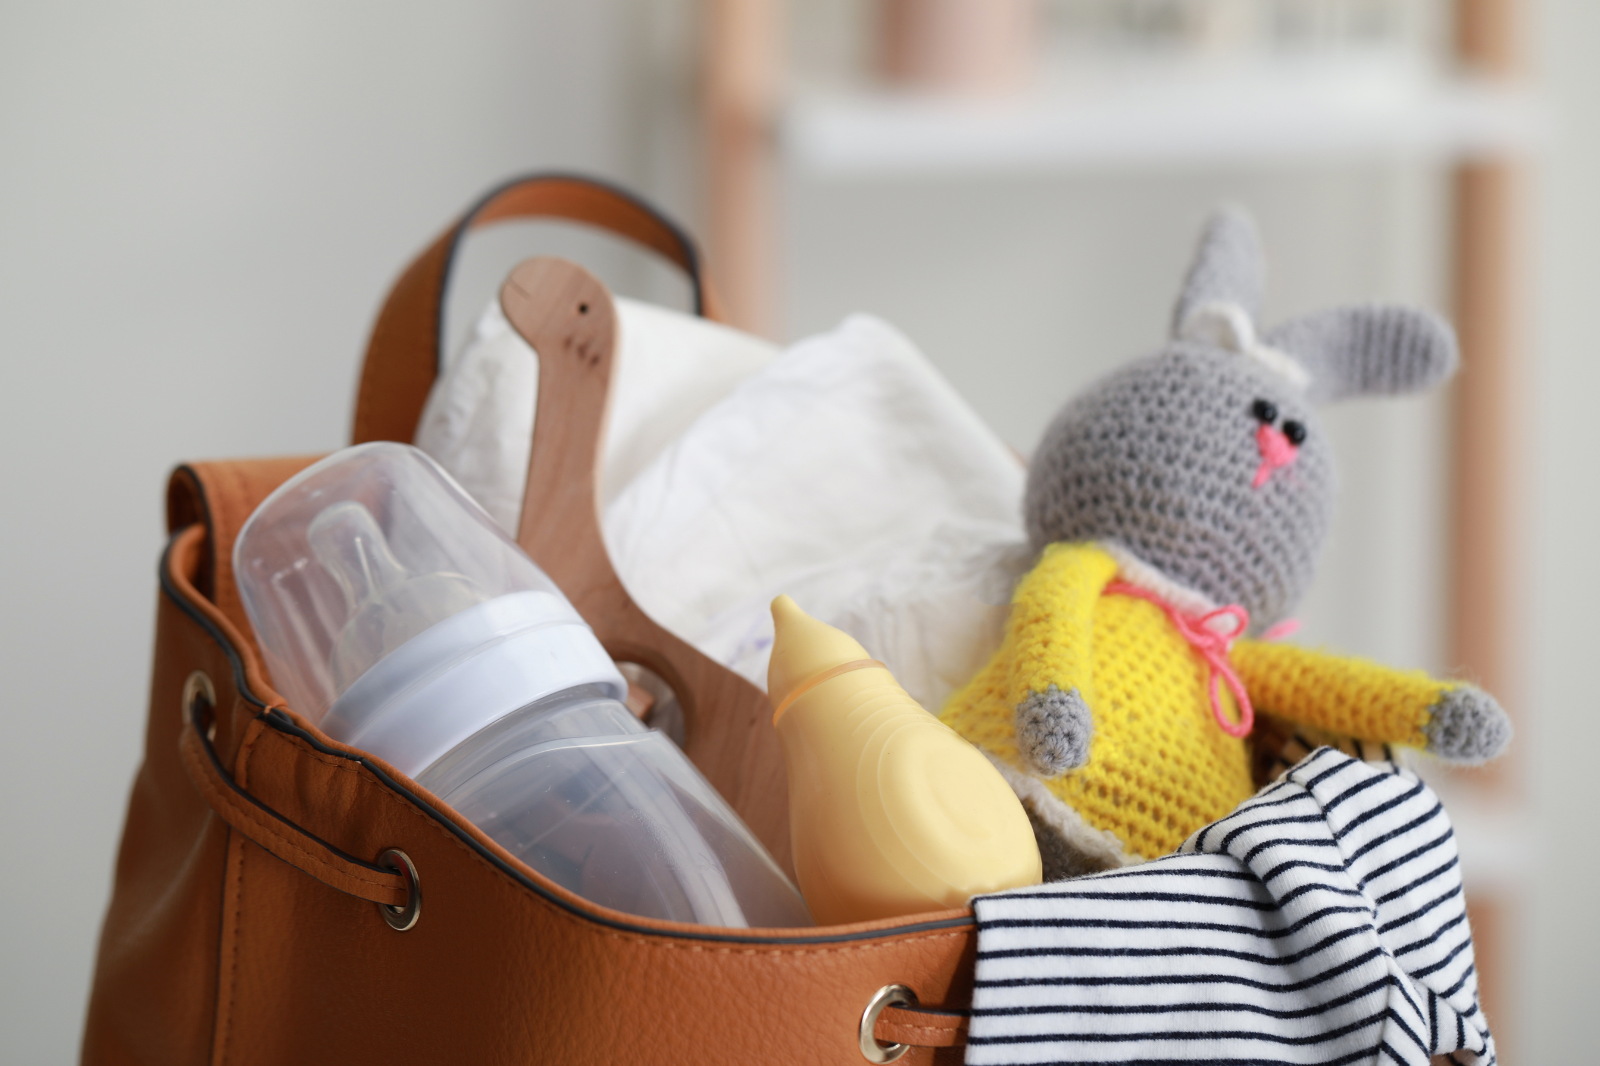 What to pack in Baby diaper bag when traveling by plane